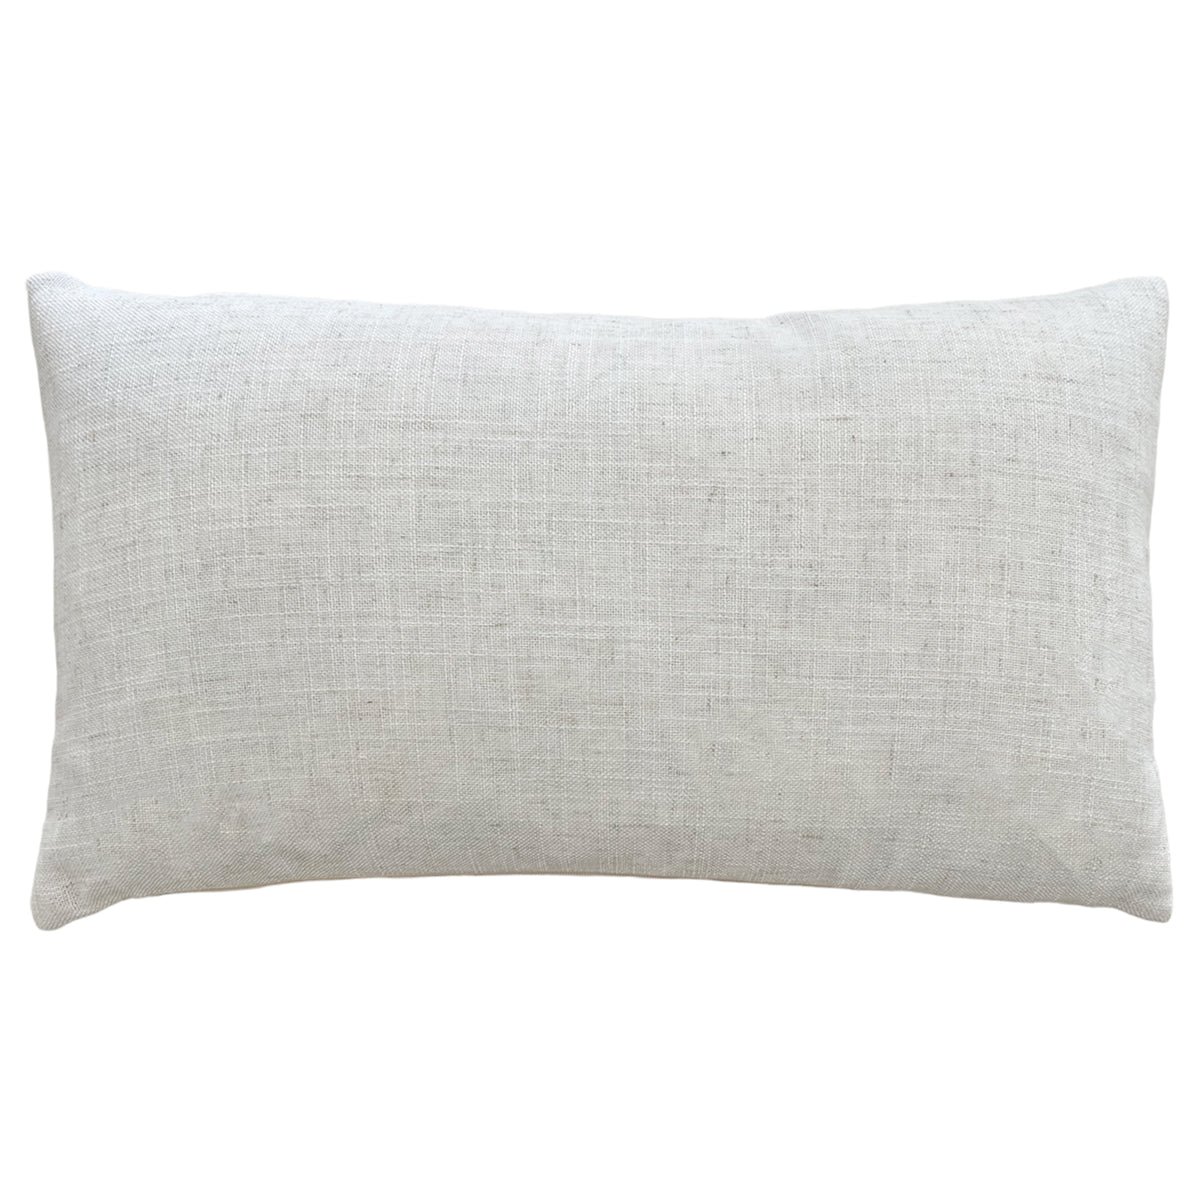 Snowy Hare 50cm Bolster Cushion by Roseland Furniture